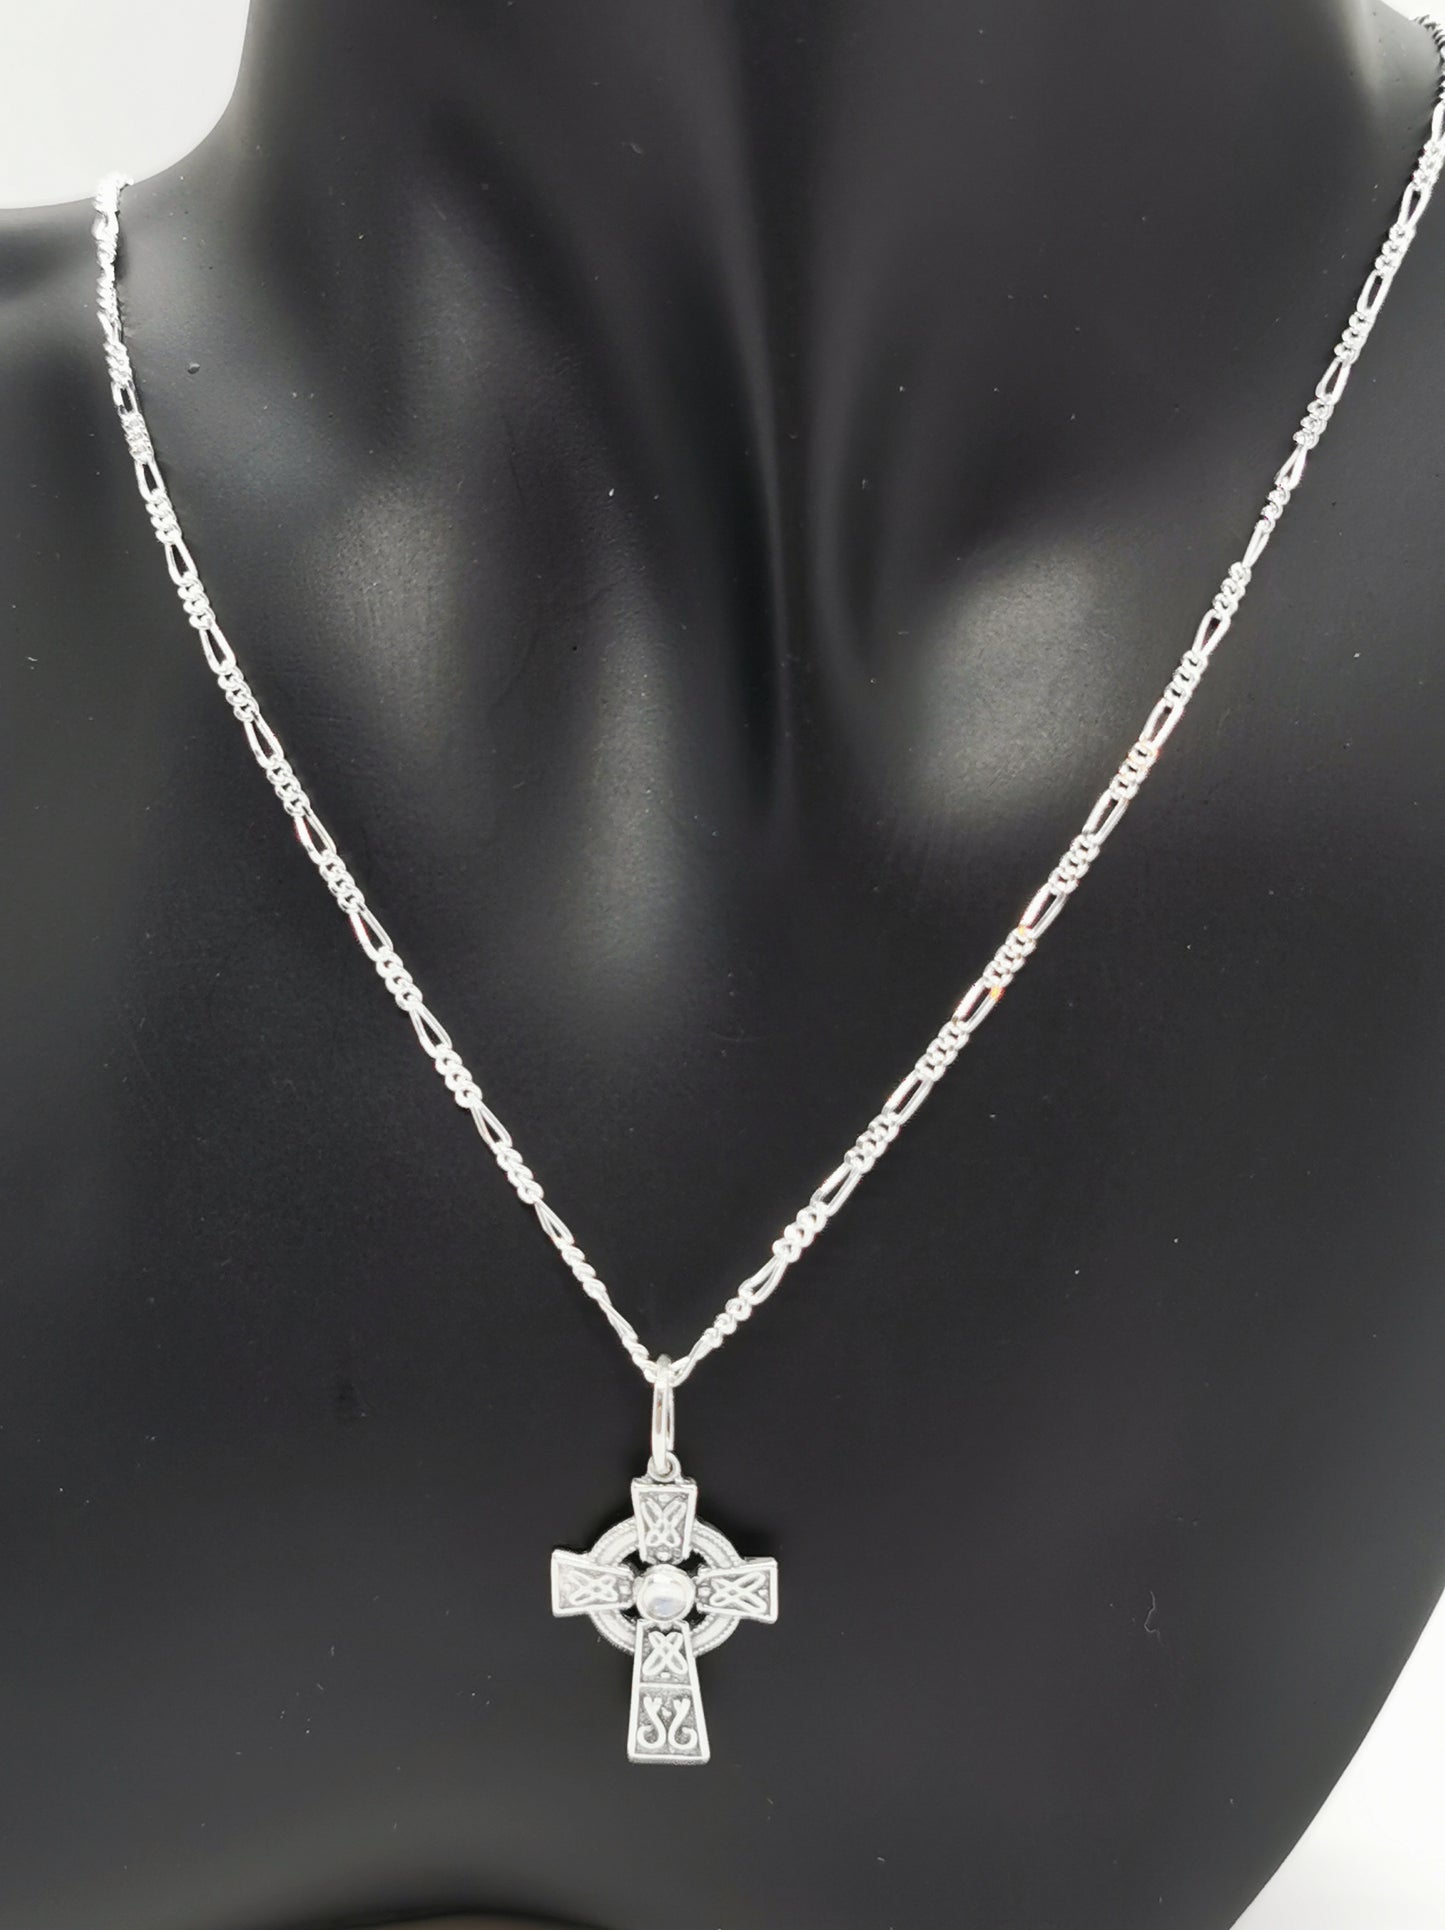 Sterling silver figgaro chain made to order